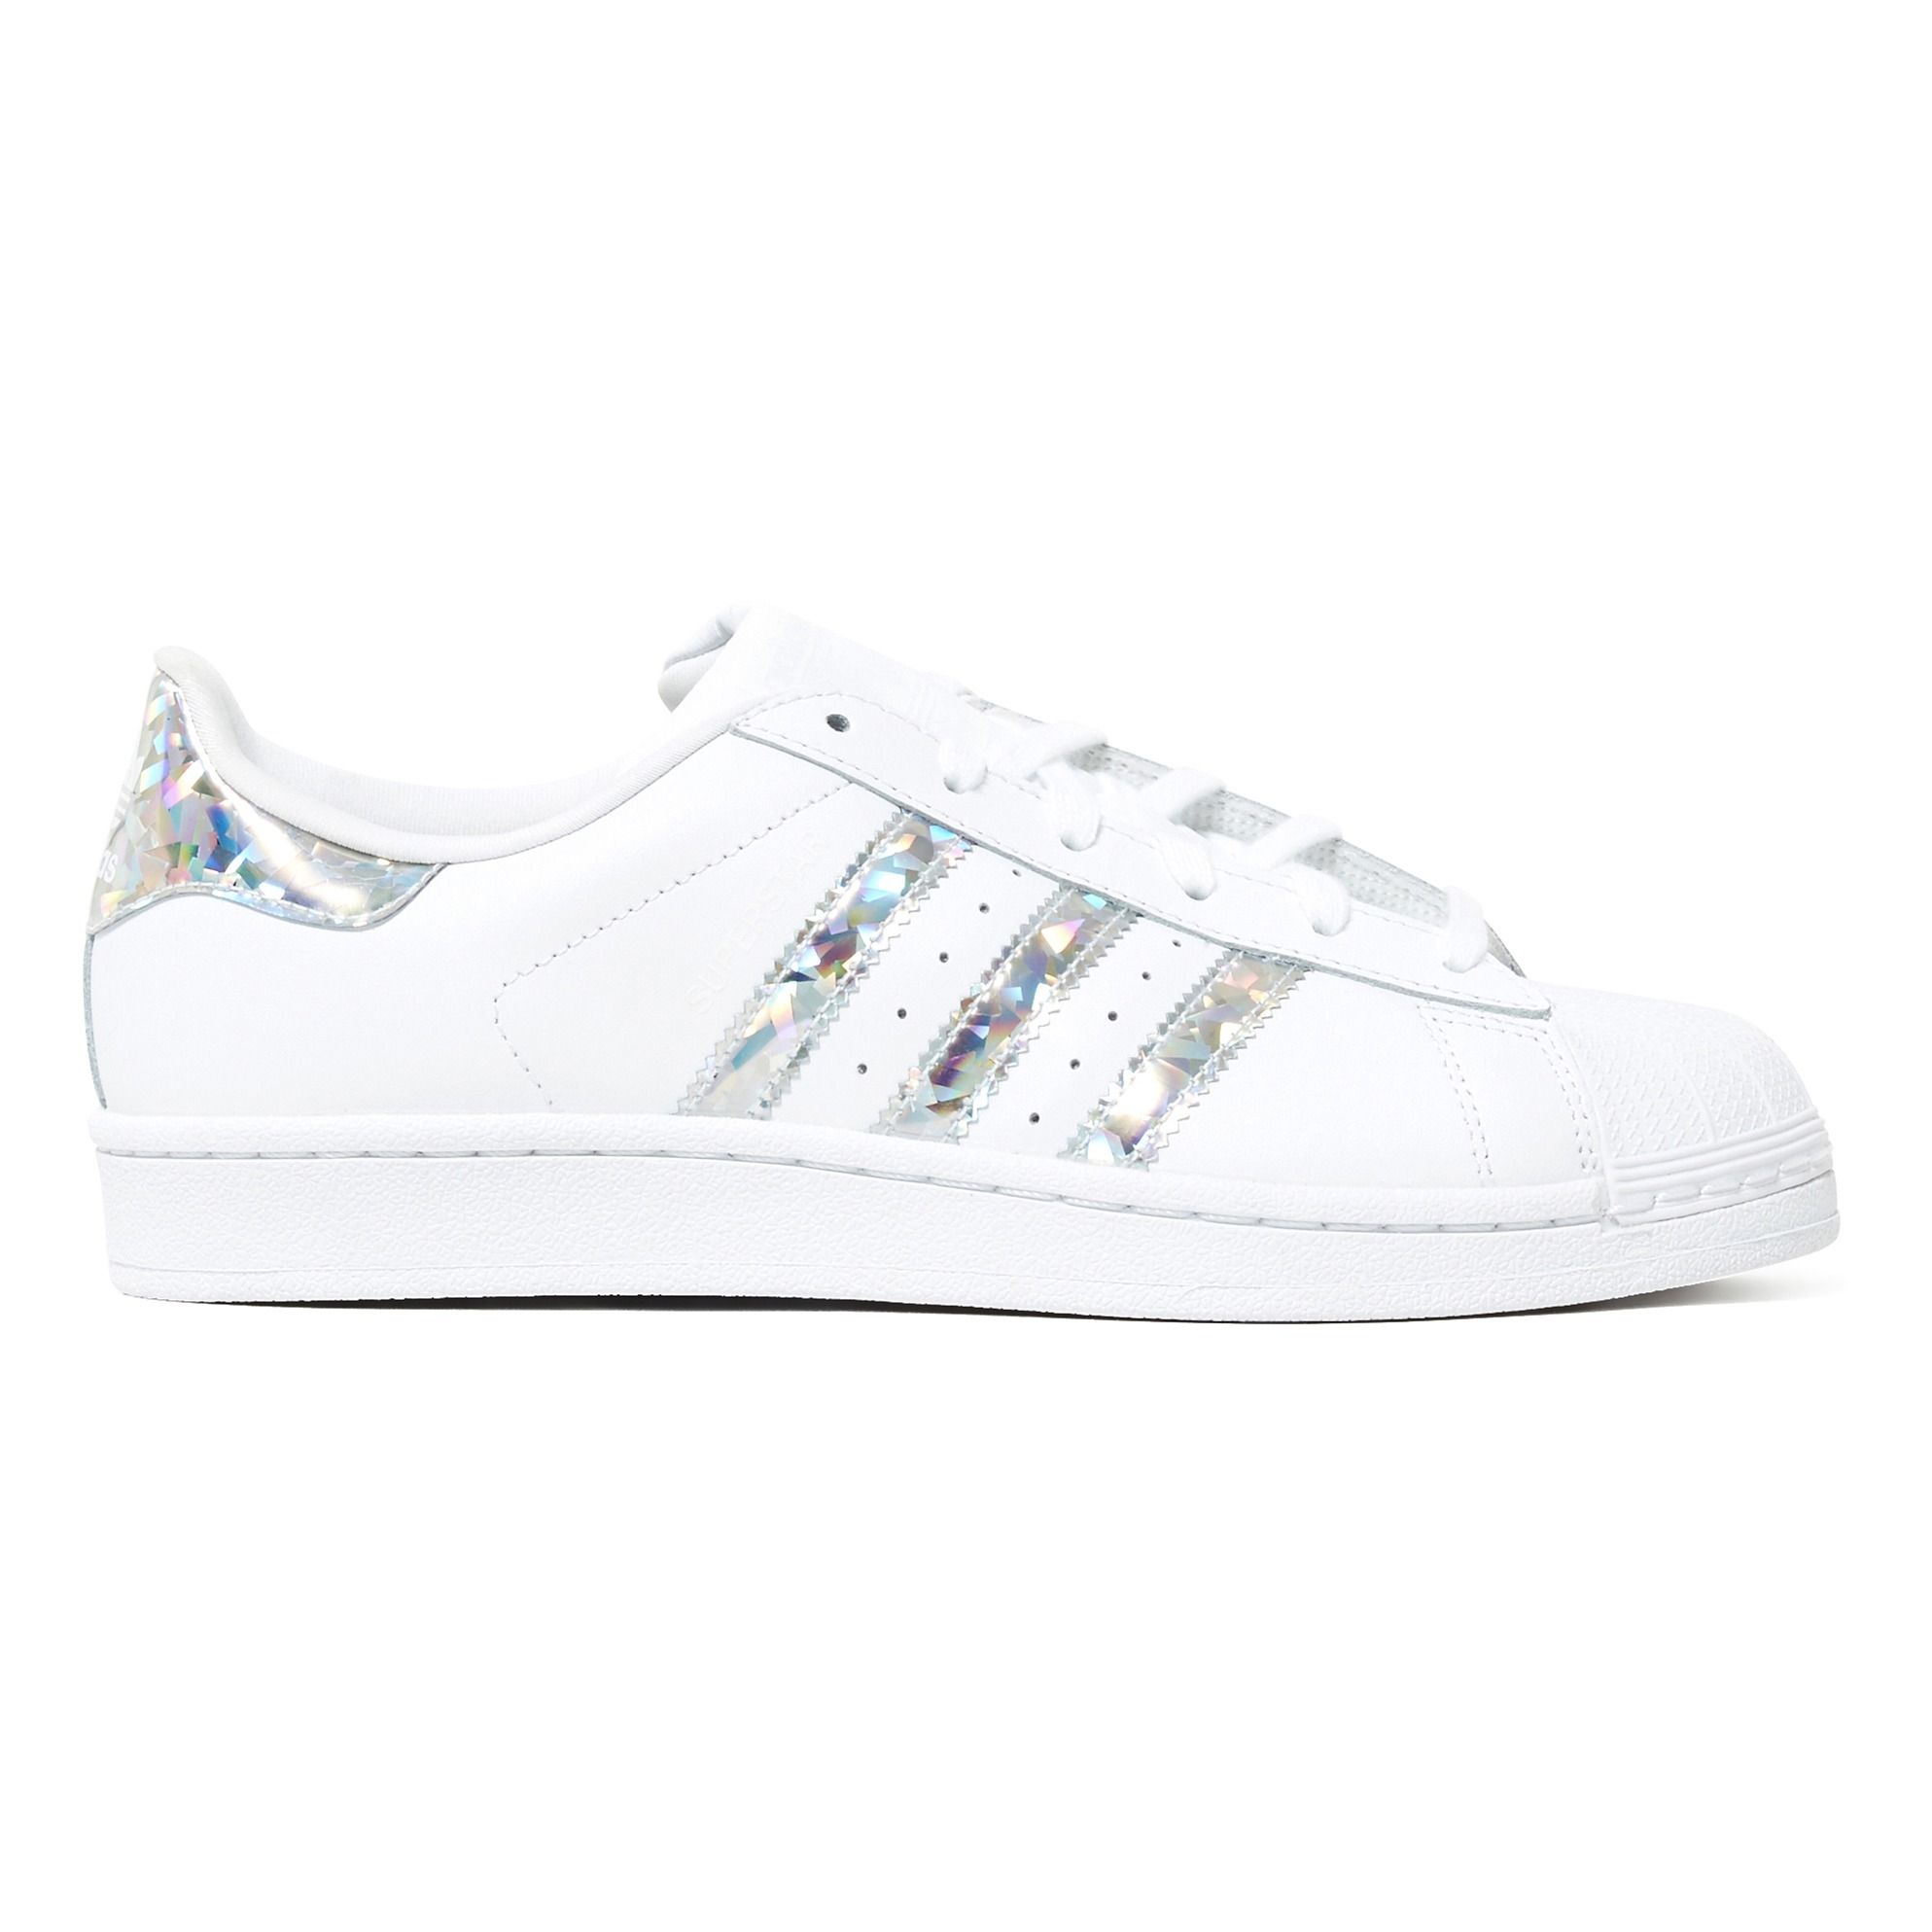 Superstar Holographic Trainers Cheapest Sellers, Save 40% | jlcatj.gob.mx